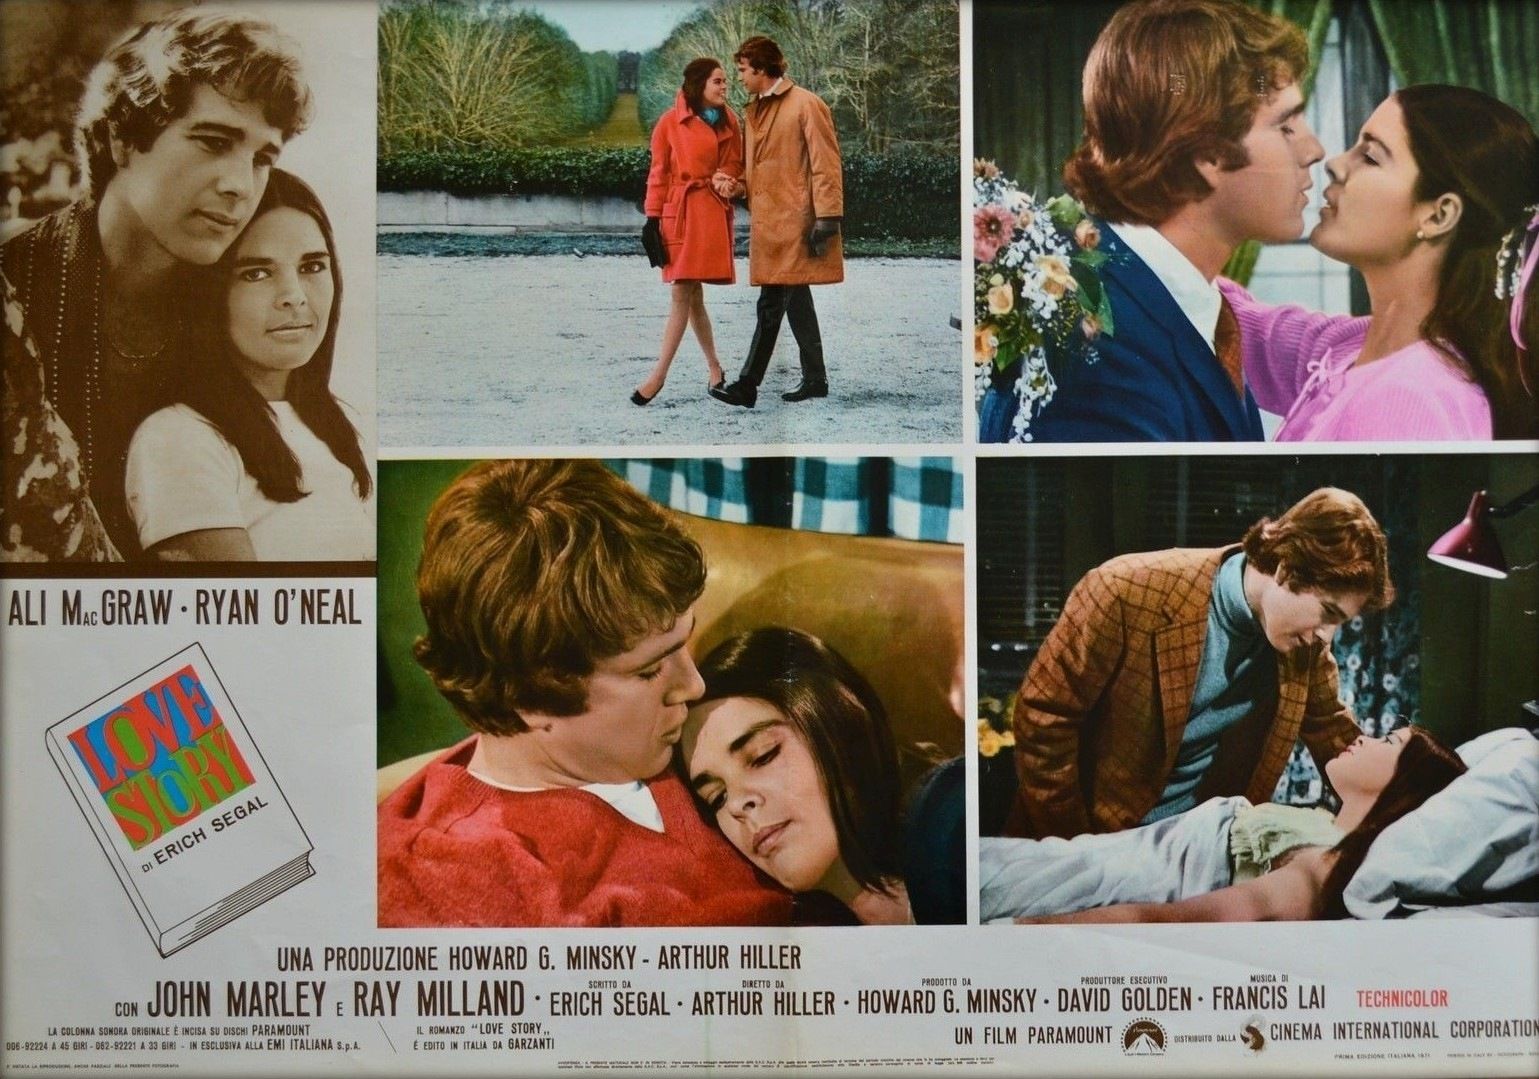 Love Story, Ali MacGraw,  Ryan O'Neal and the Ivy League Look